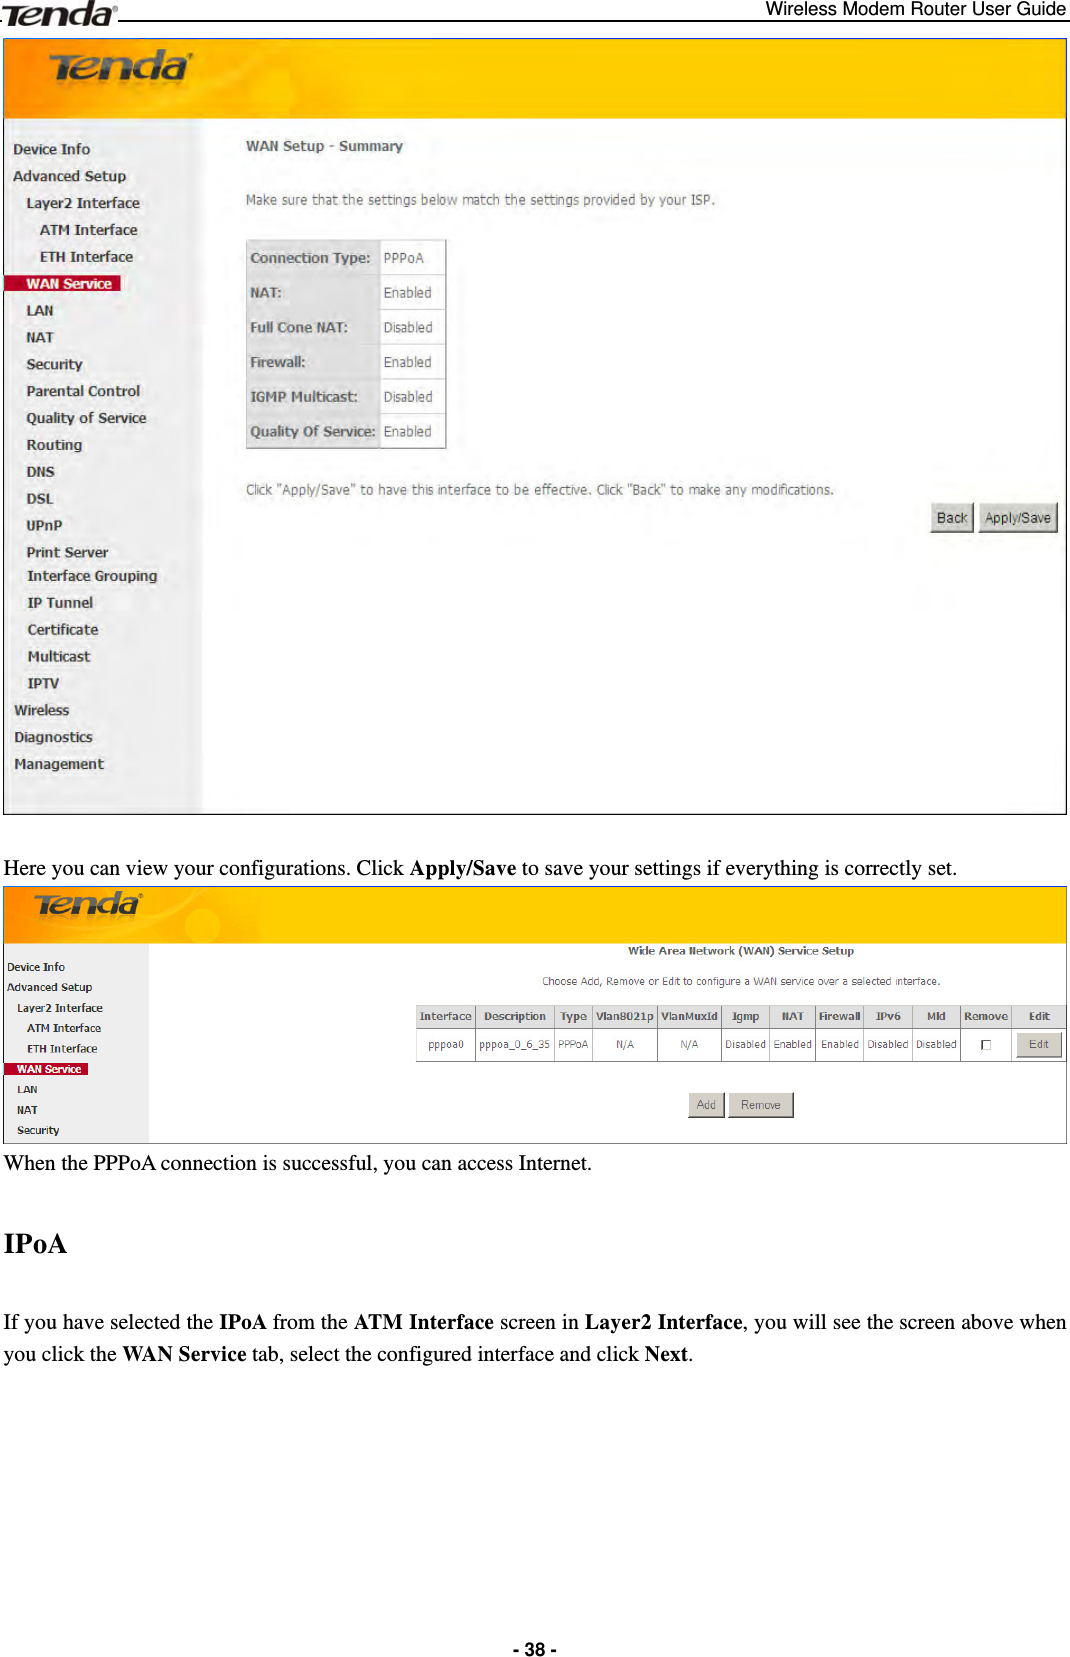 Wireless Modem Router User Guide  - 38 -  Here you can view your configurations. Click Apply/Save to save your settings if everything is correctly set.  When the PPPoA connection is successful, you can access Internet. IPoA If you have selected the IPoA from the ATM Interface screen in Layer2 Interface, you will see the screen above when you click the WAN Service tab, select the configured interface and click Next.   